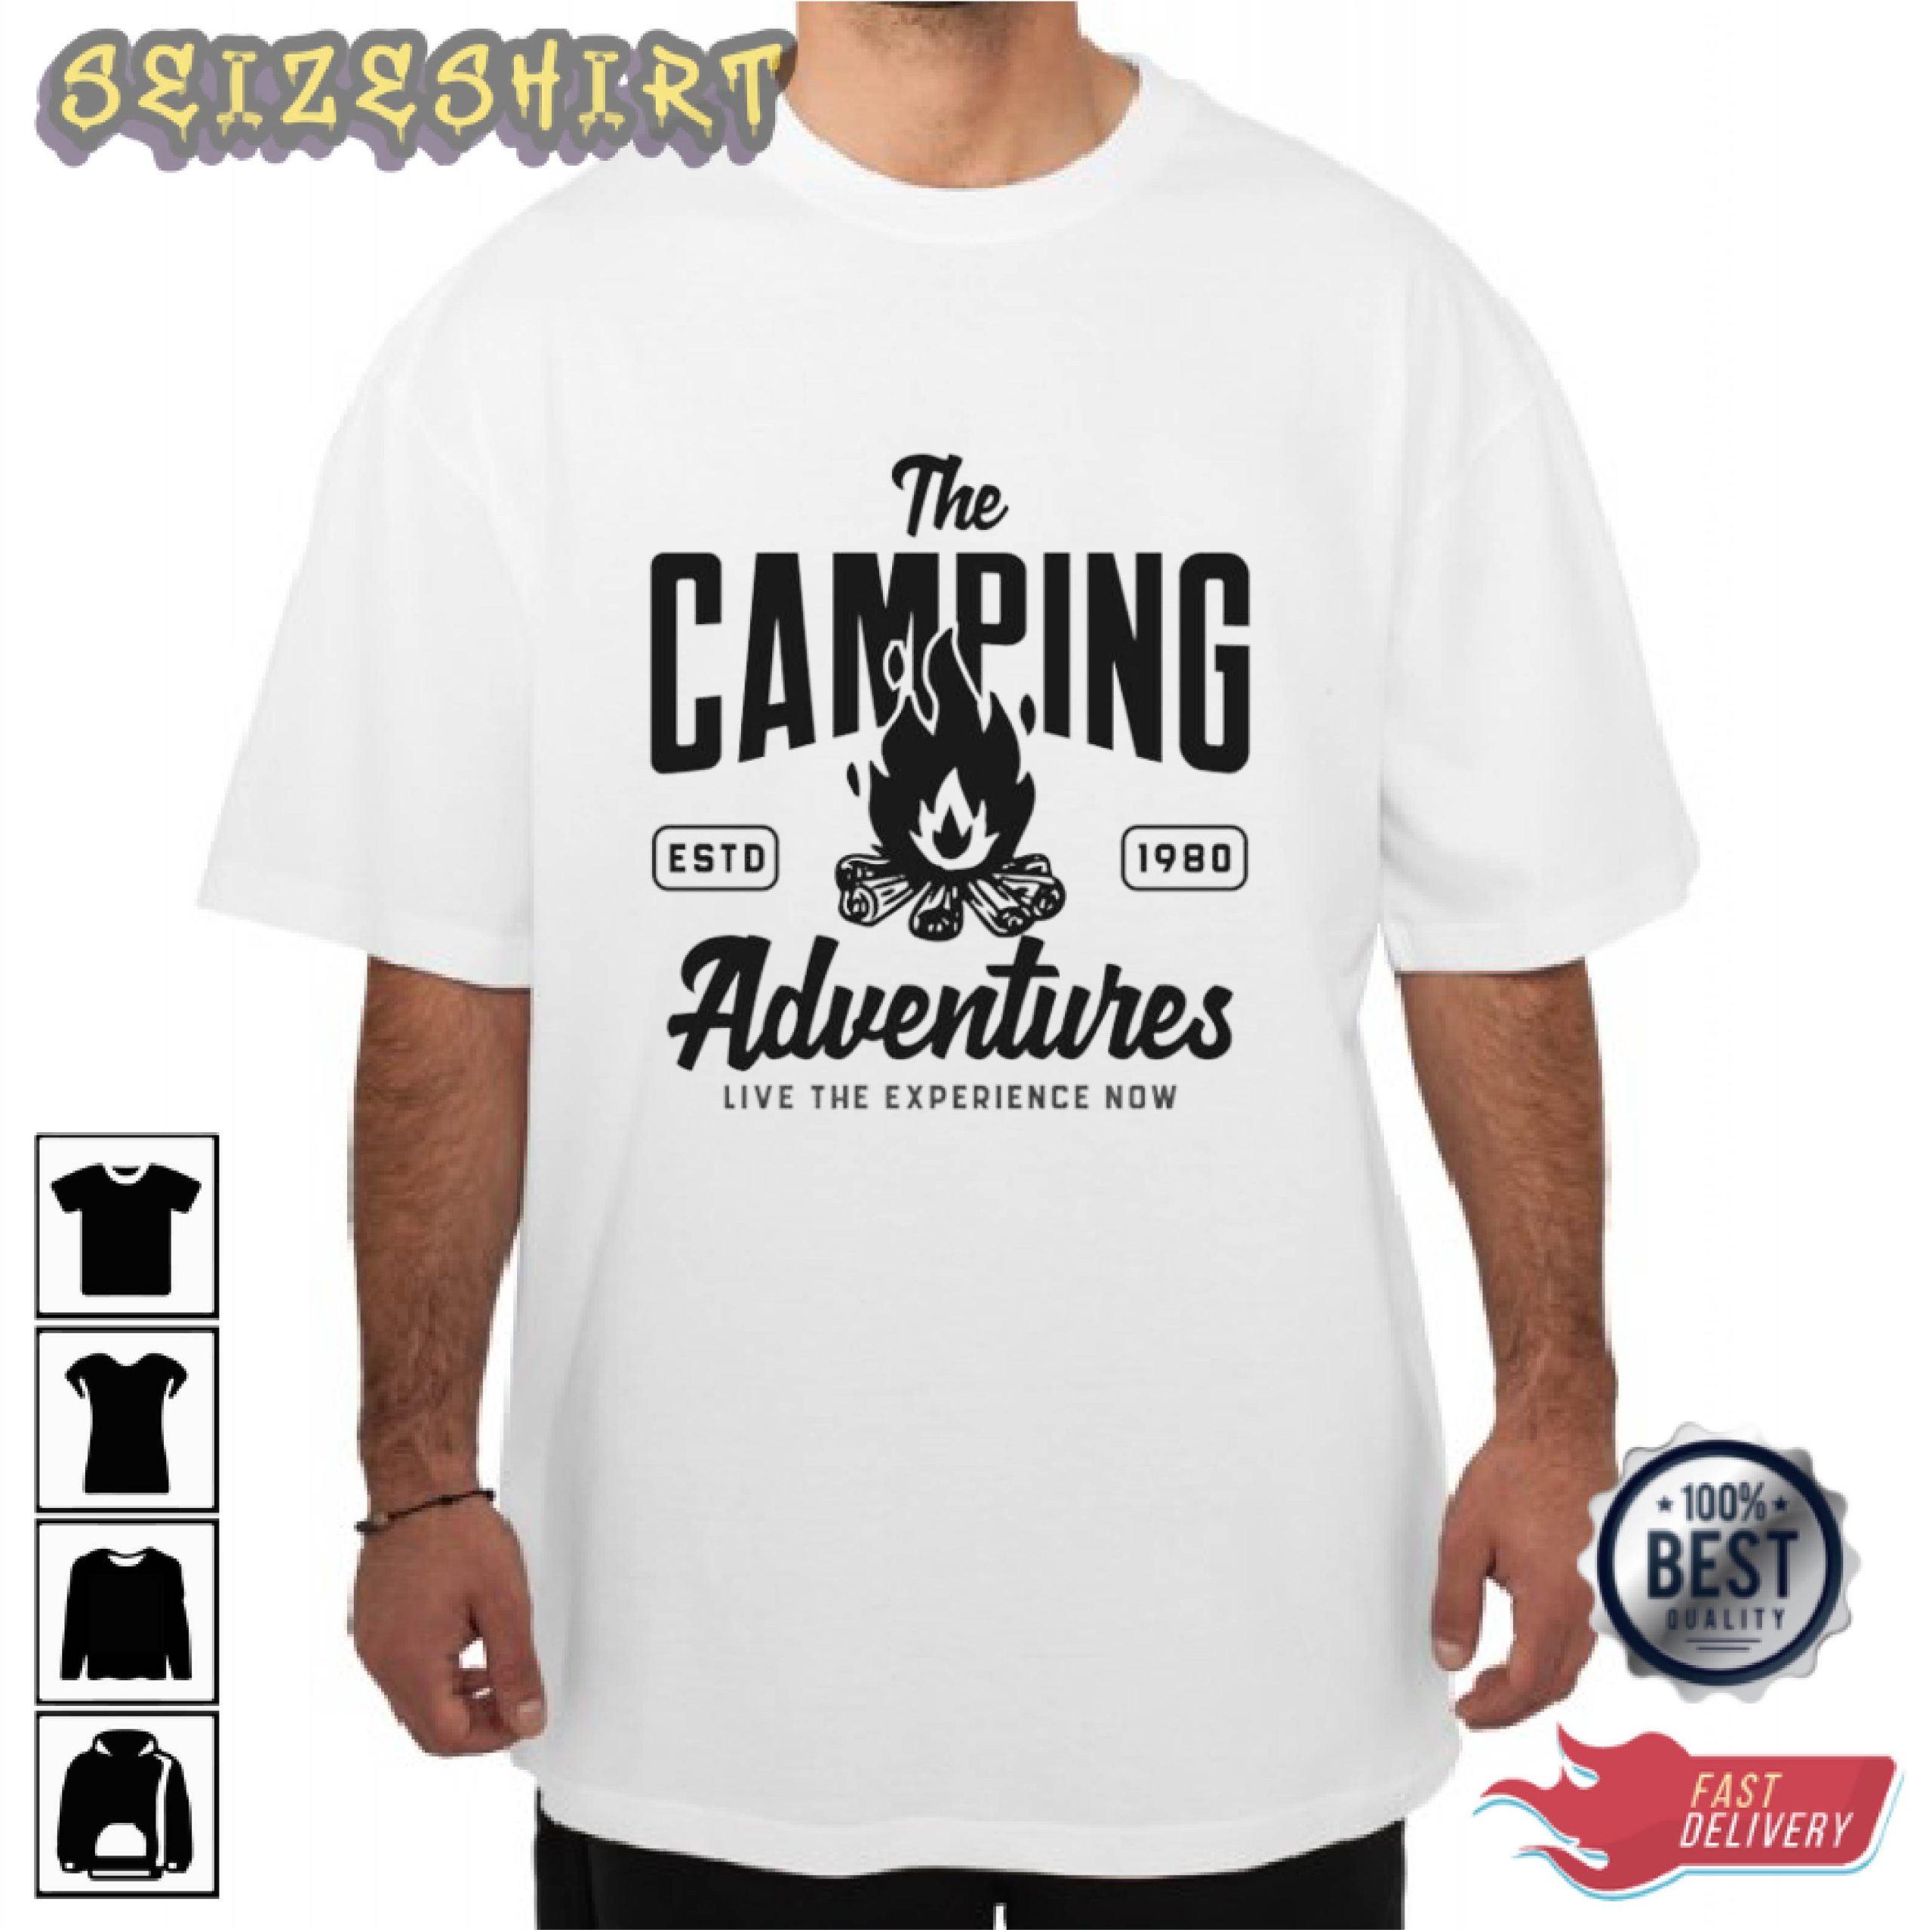 The Camping Adventures 1980 Graphic Tee